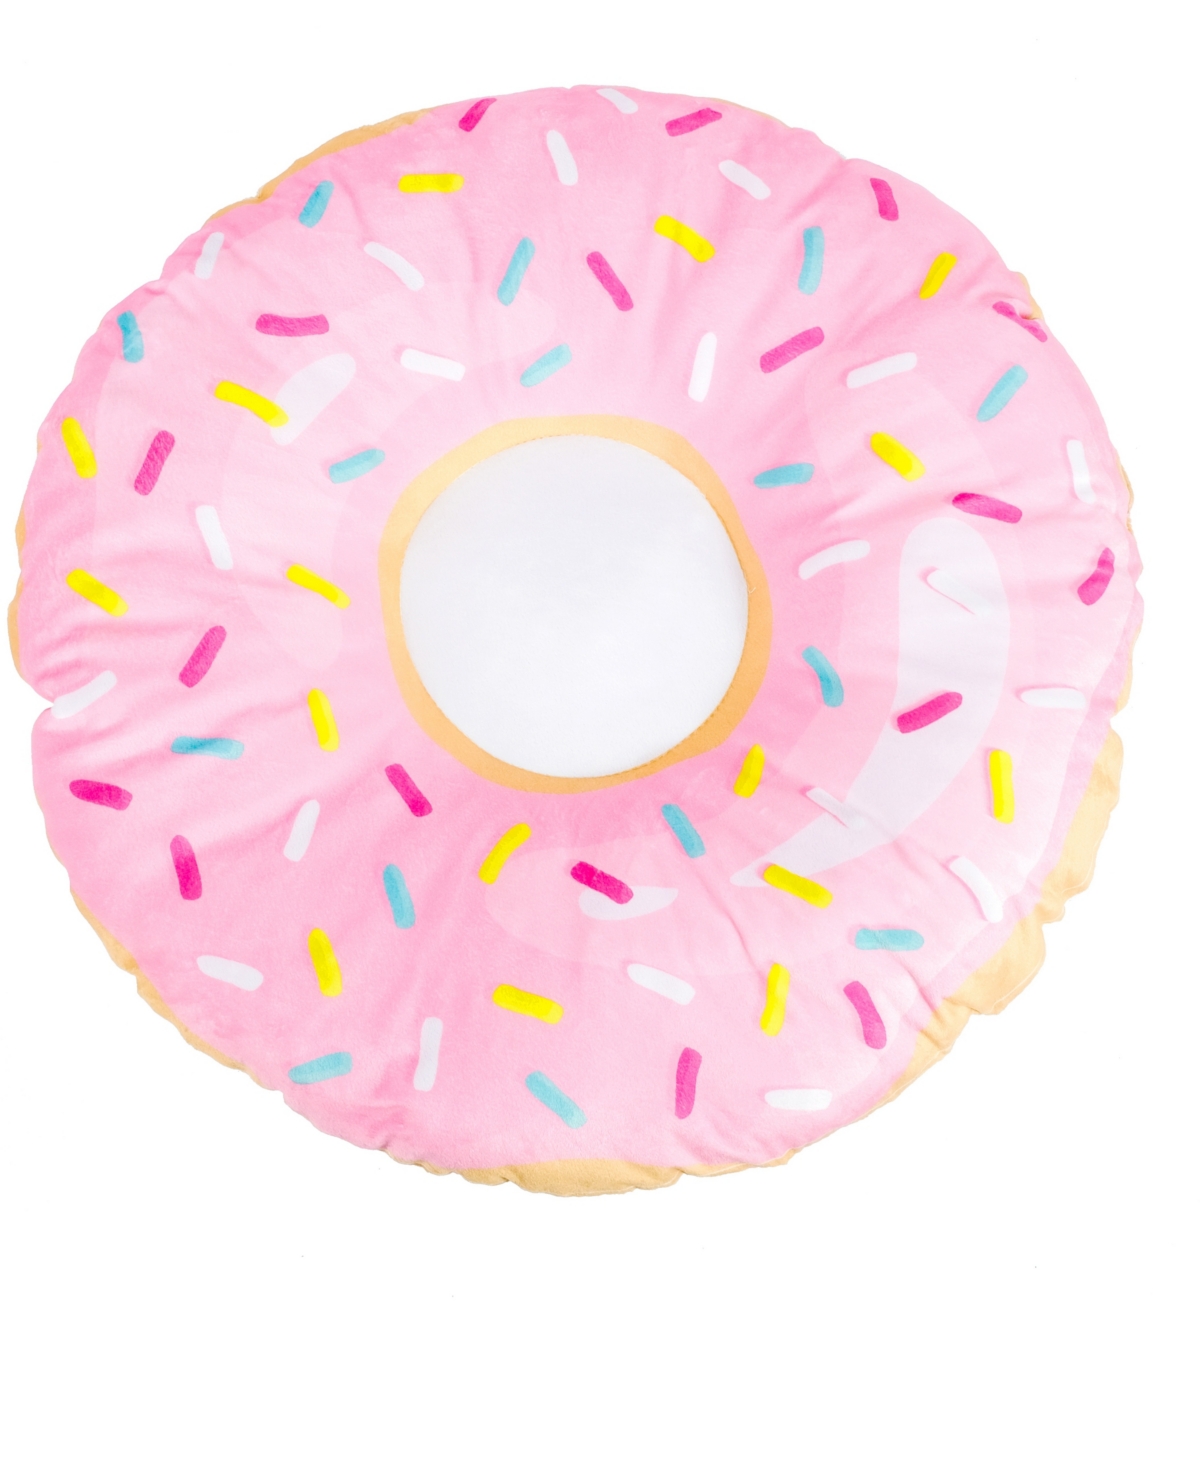 3D Print Donut Pet Bed, 35" - Pink Party Sprinkle